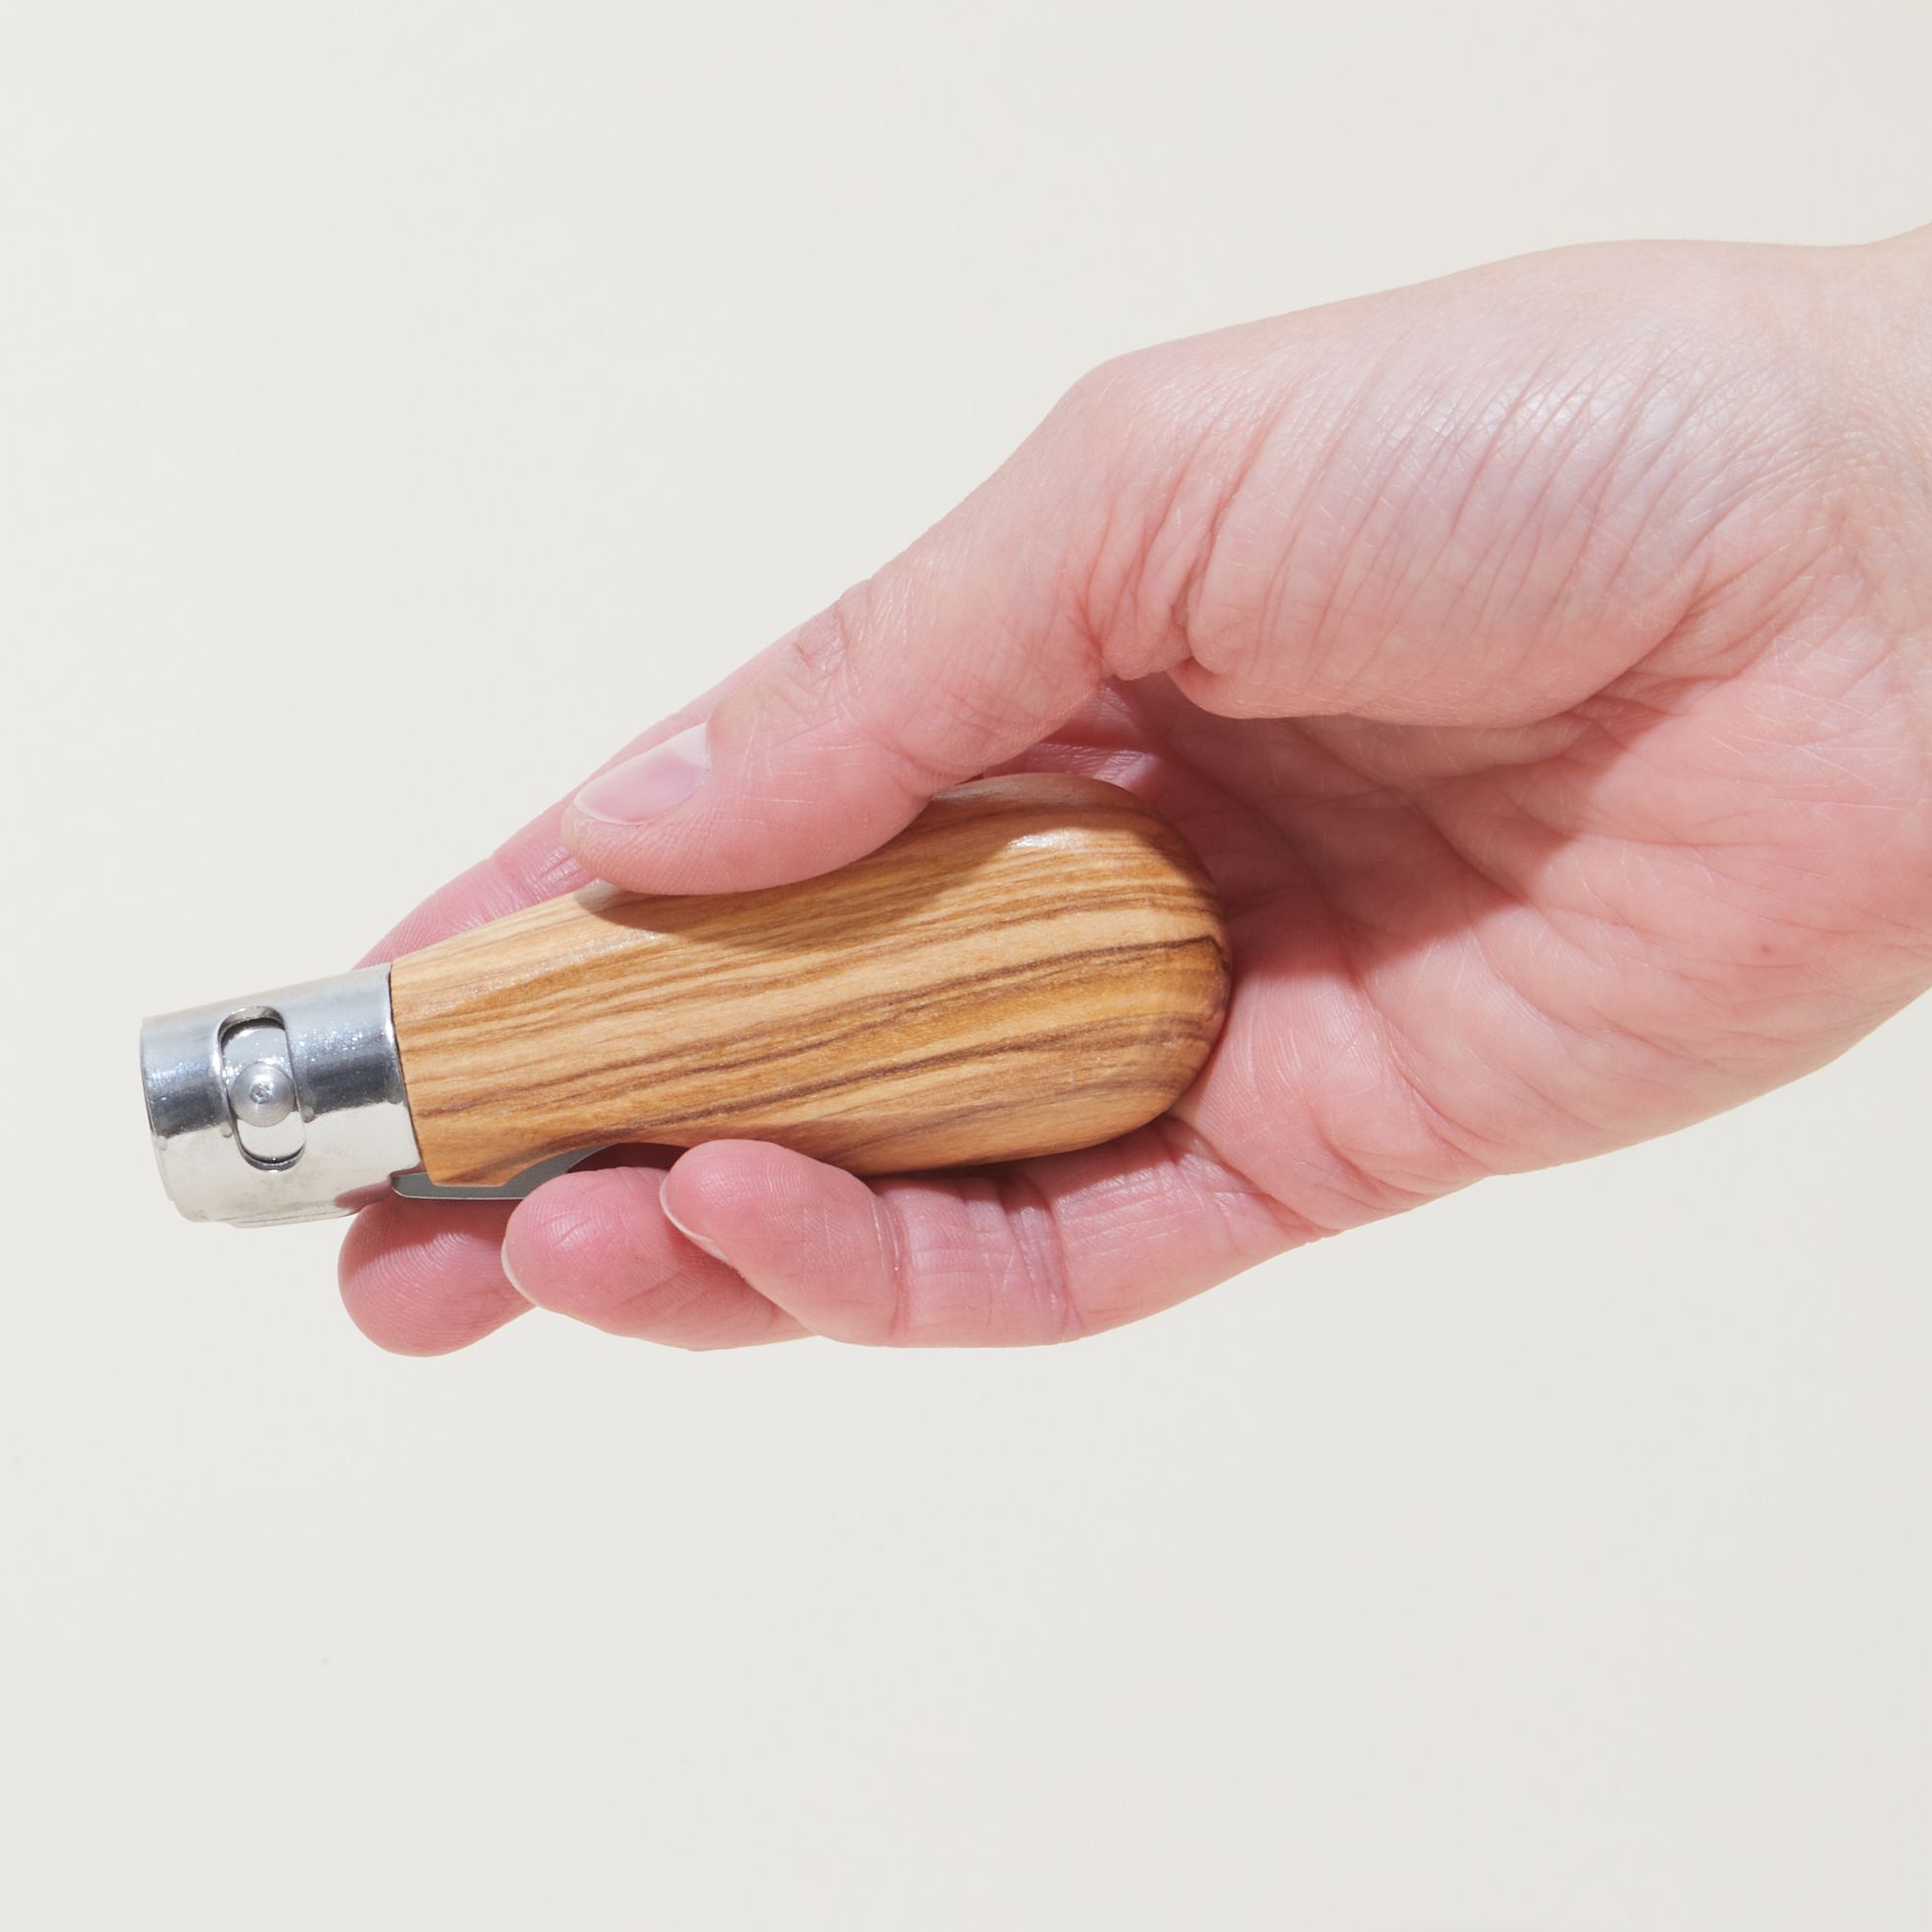 Hand holding a closed pocket knife with an olivewood handle